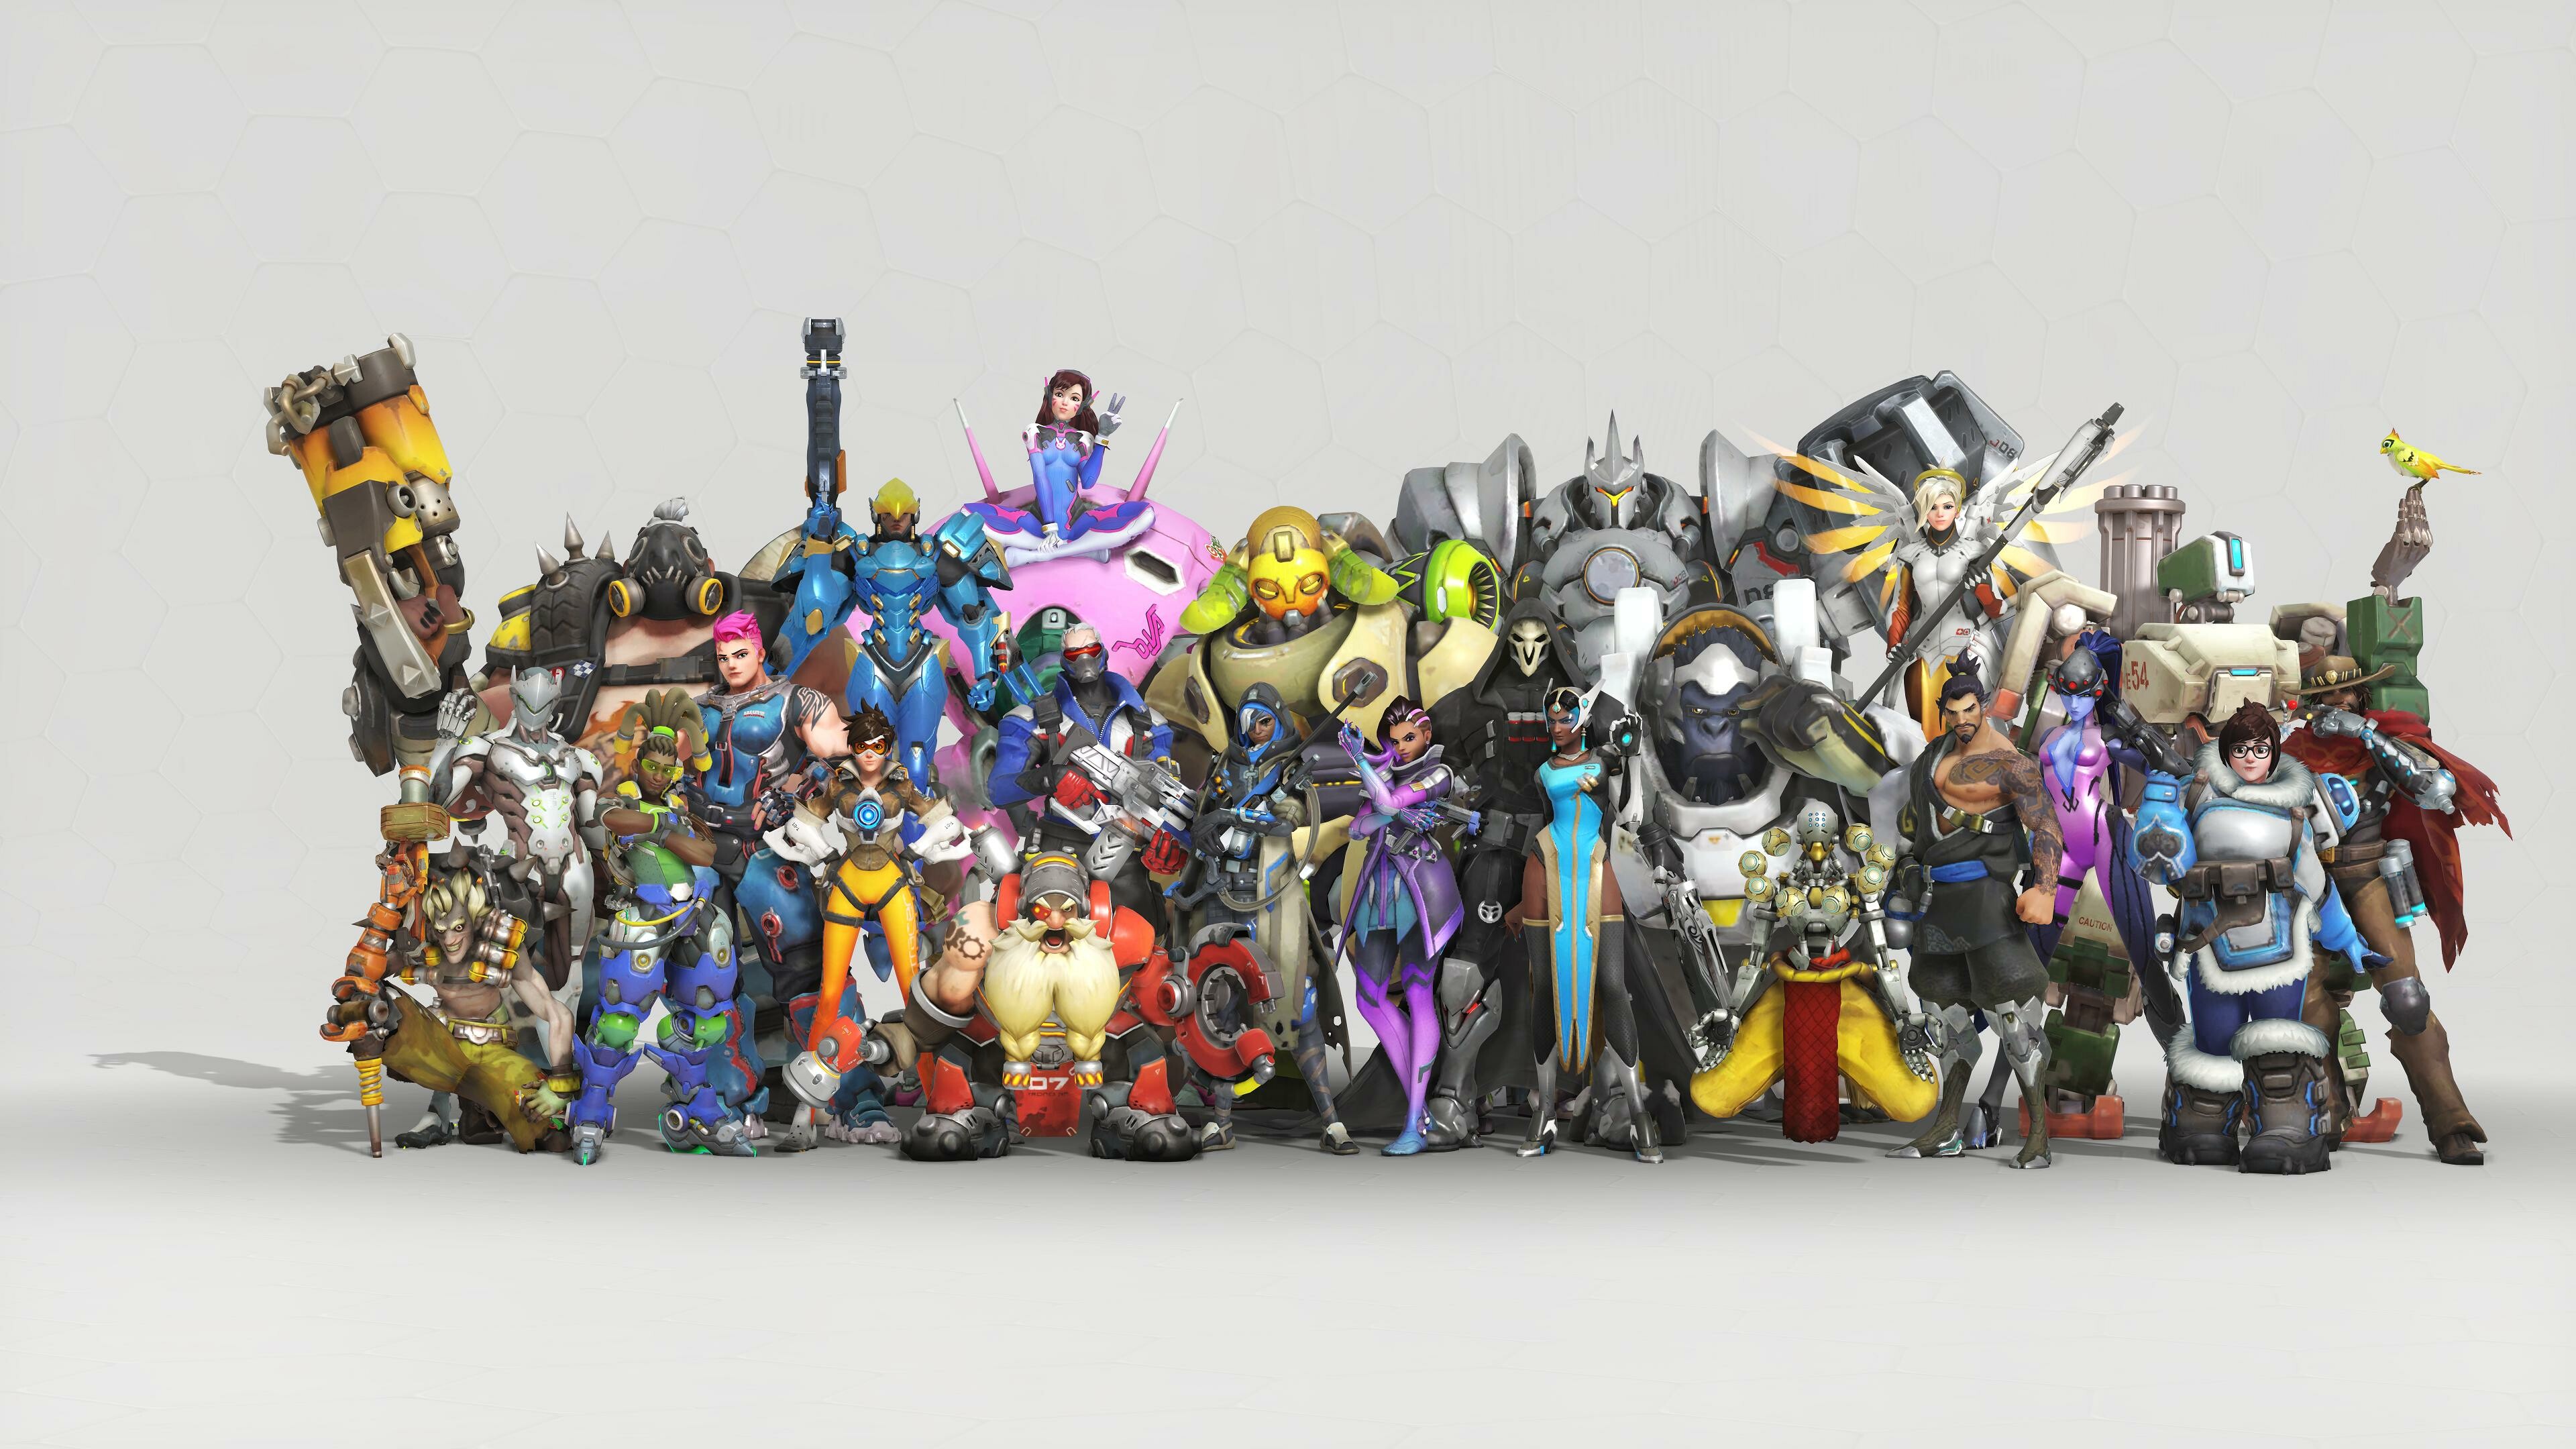 Overwatch: A multimedia franchise, Developed by Blizzard Entertainment. 3840x2160 4K Wallpaper.